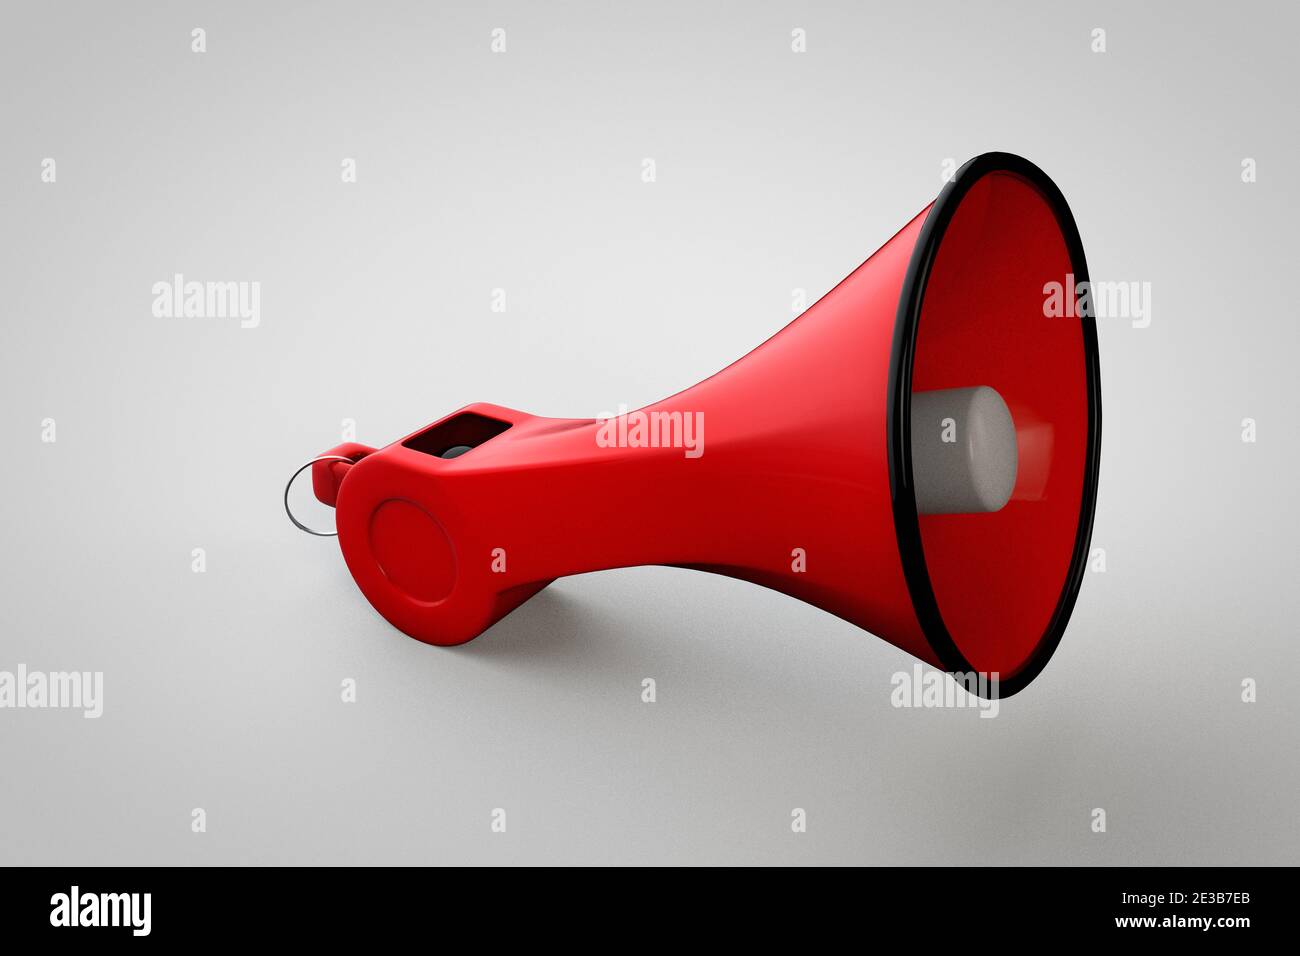 Whistle in the shape of a loudspeaker demonstrating whistleblower employee or company exposing corruption concept. 3D illustration Stock Photo